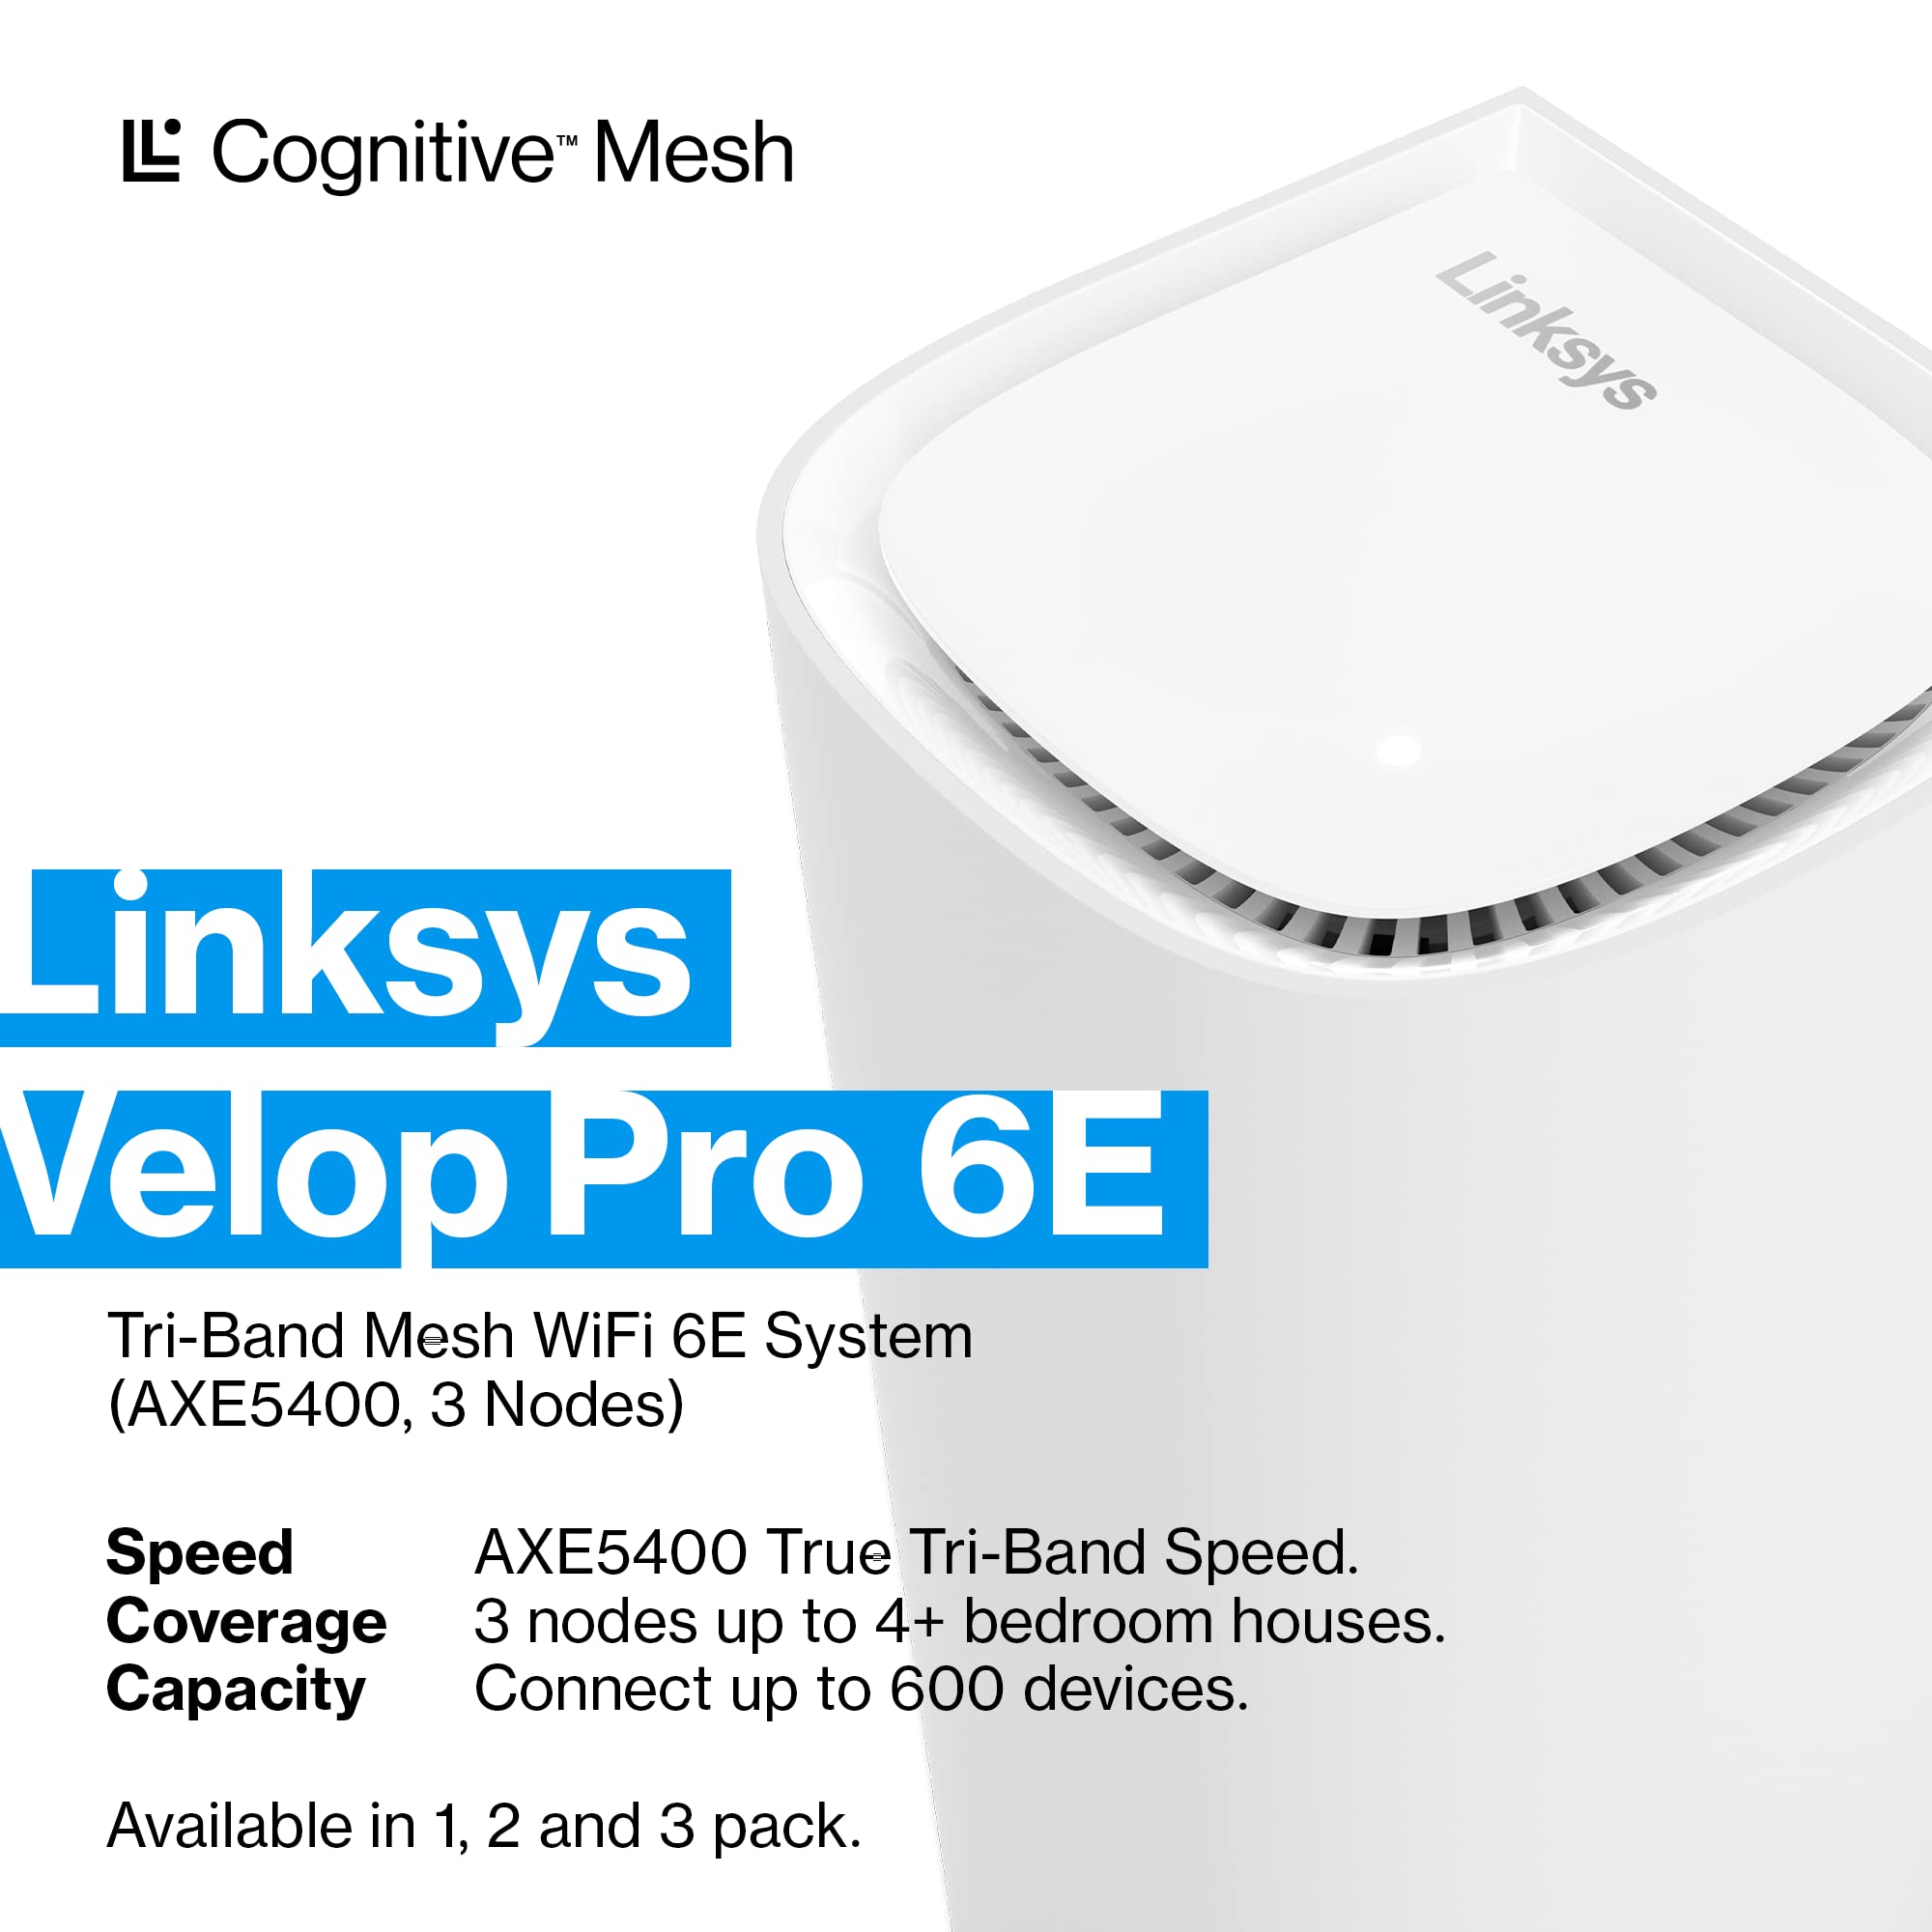 Linksys Velop Pro WiFi 6E Mesh System - Cognitive Mesh Router with 6 Ghz Band Access & 5.4 (AXE5400) Gbps True Gigabit Speed - Whole-Home Coverage up to 9,000 sq. ft. & 600+ Devices - 3 Pack